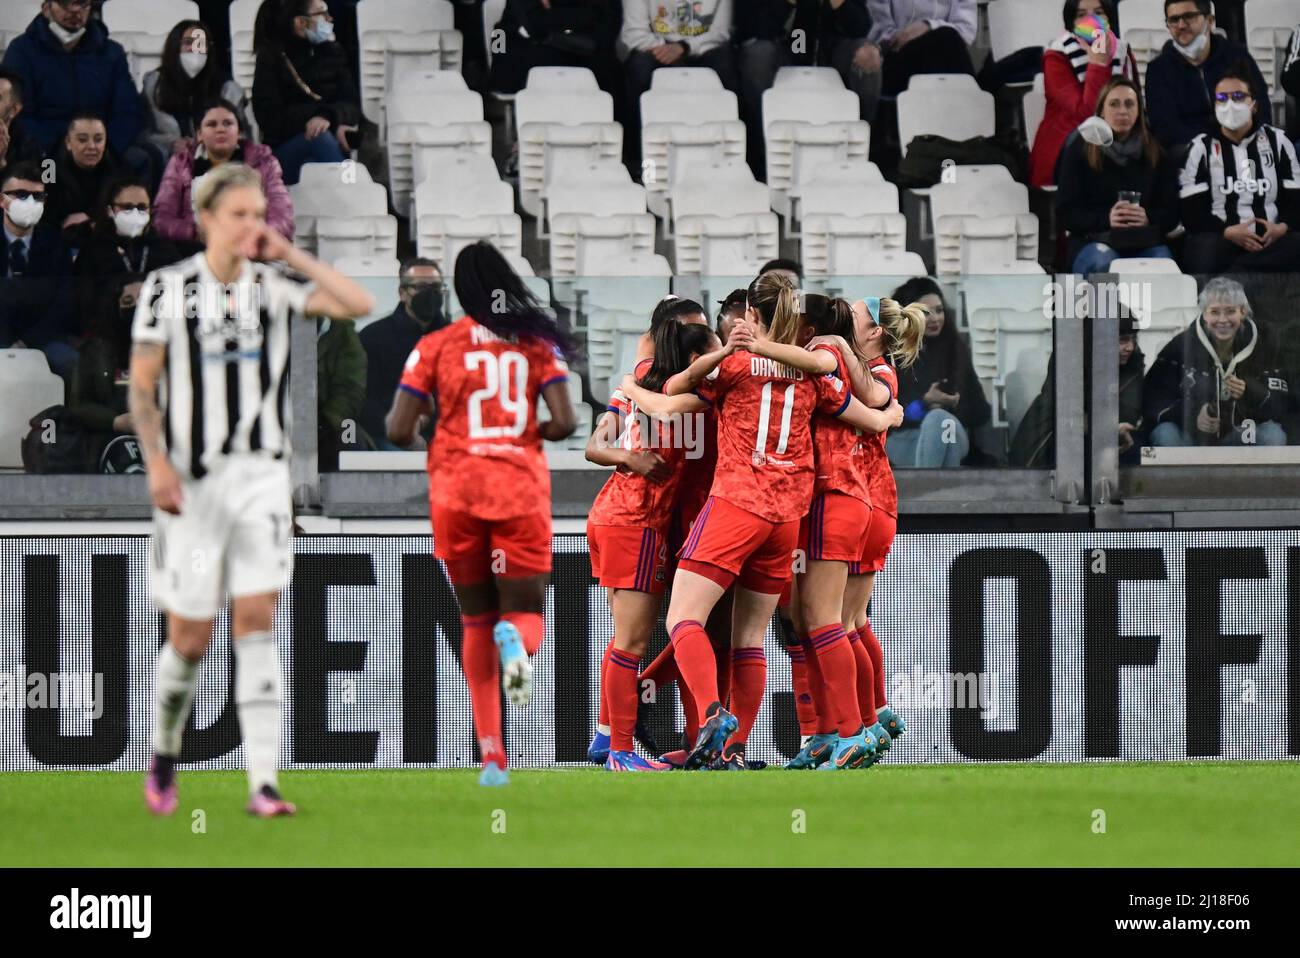 Turin, Italy. 23rd Mar, 2022. Catarina Macario (13) of Olympique Lyon scores for 0-1 and is celebrating with the team during the UEFA Women's Champions League match between Juventus and Olympique Lyon at Juventus Stadium in Turin. (Photo Credit: Gonzales Photo/Alamy Live News Stock Photo